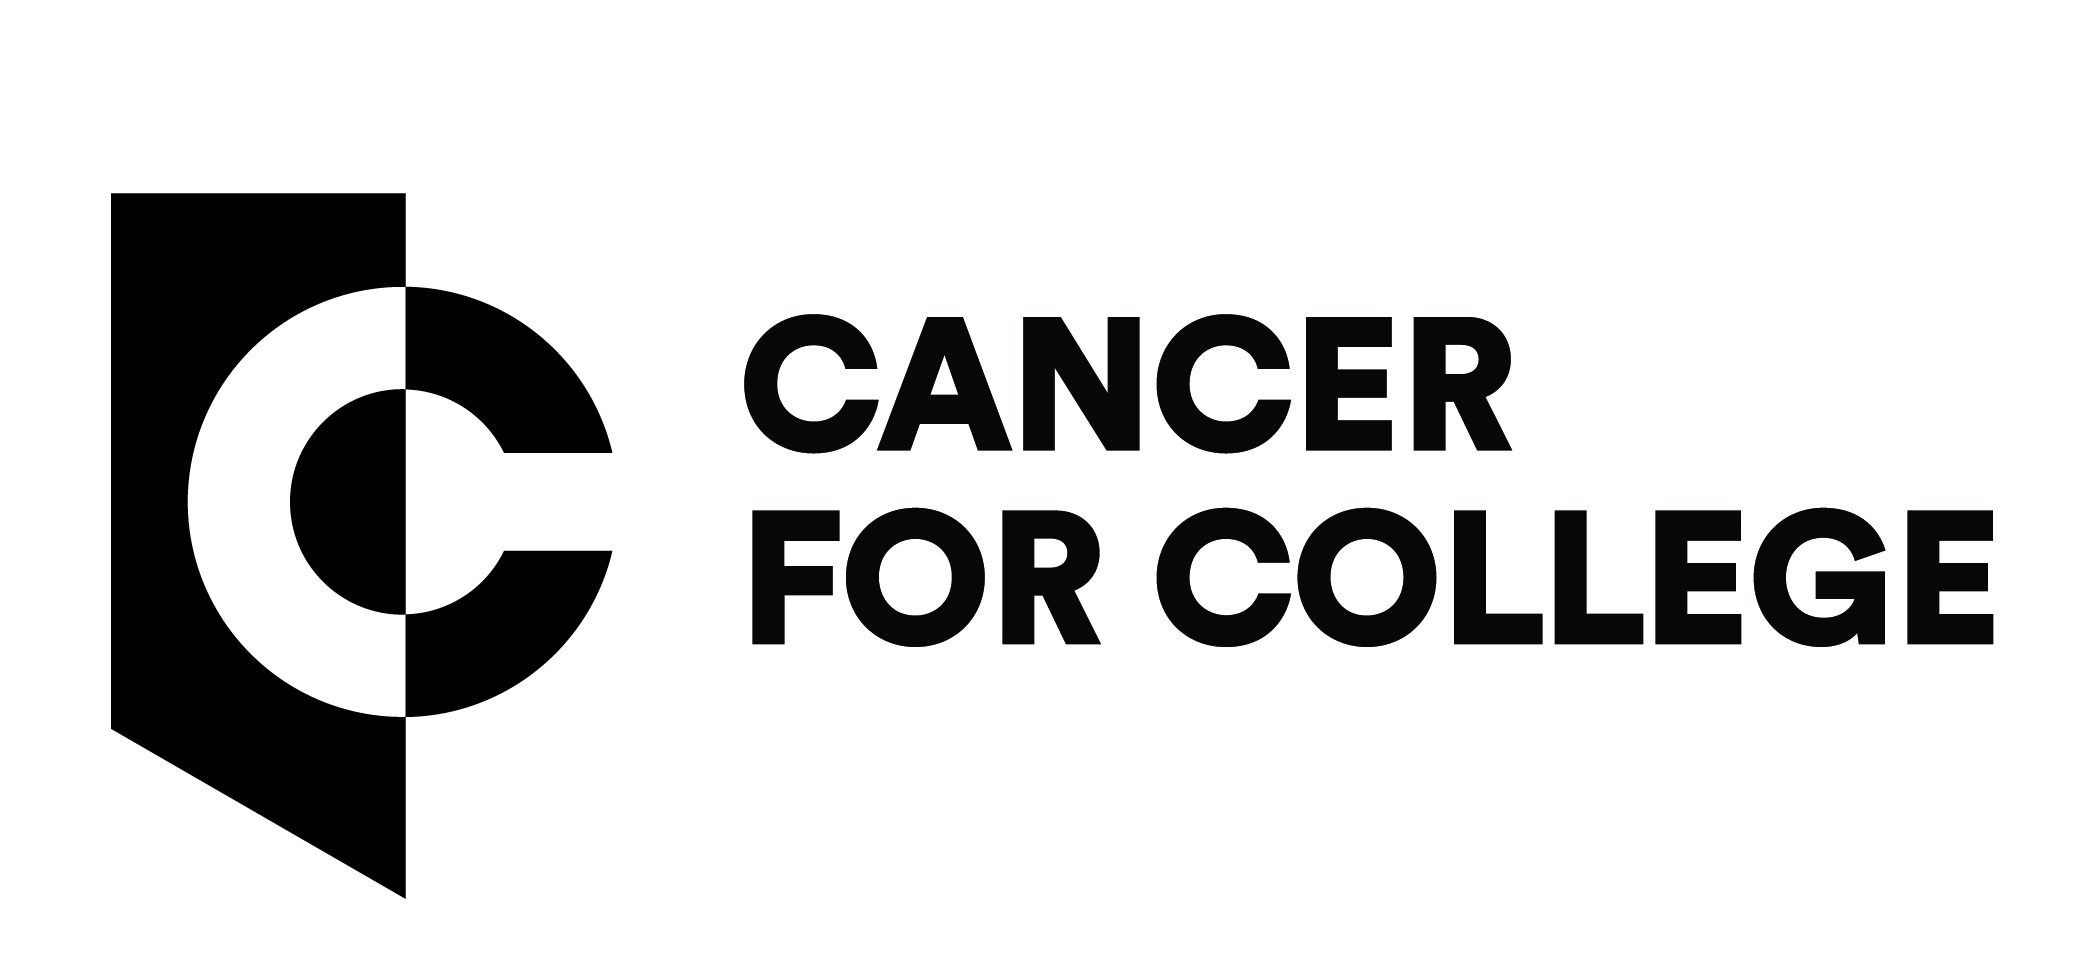 Cancer for College